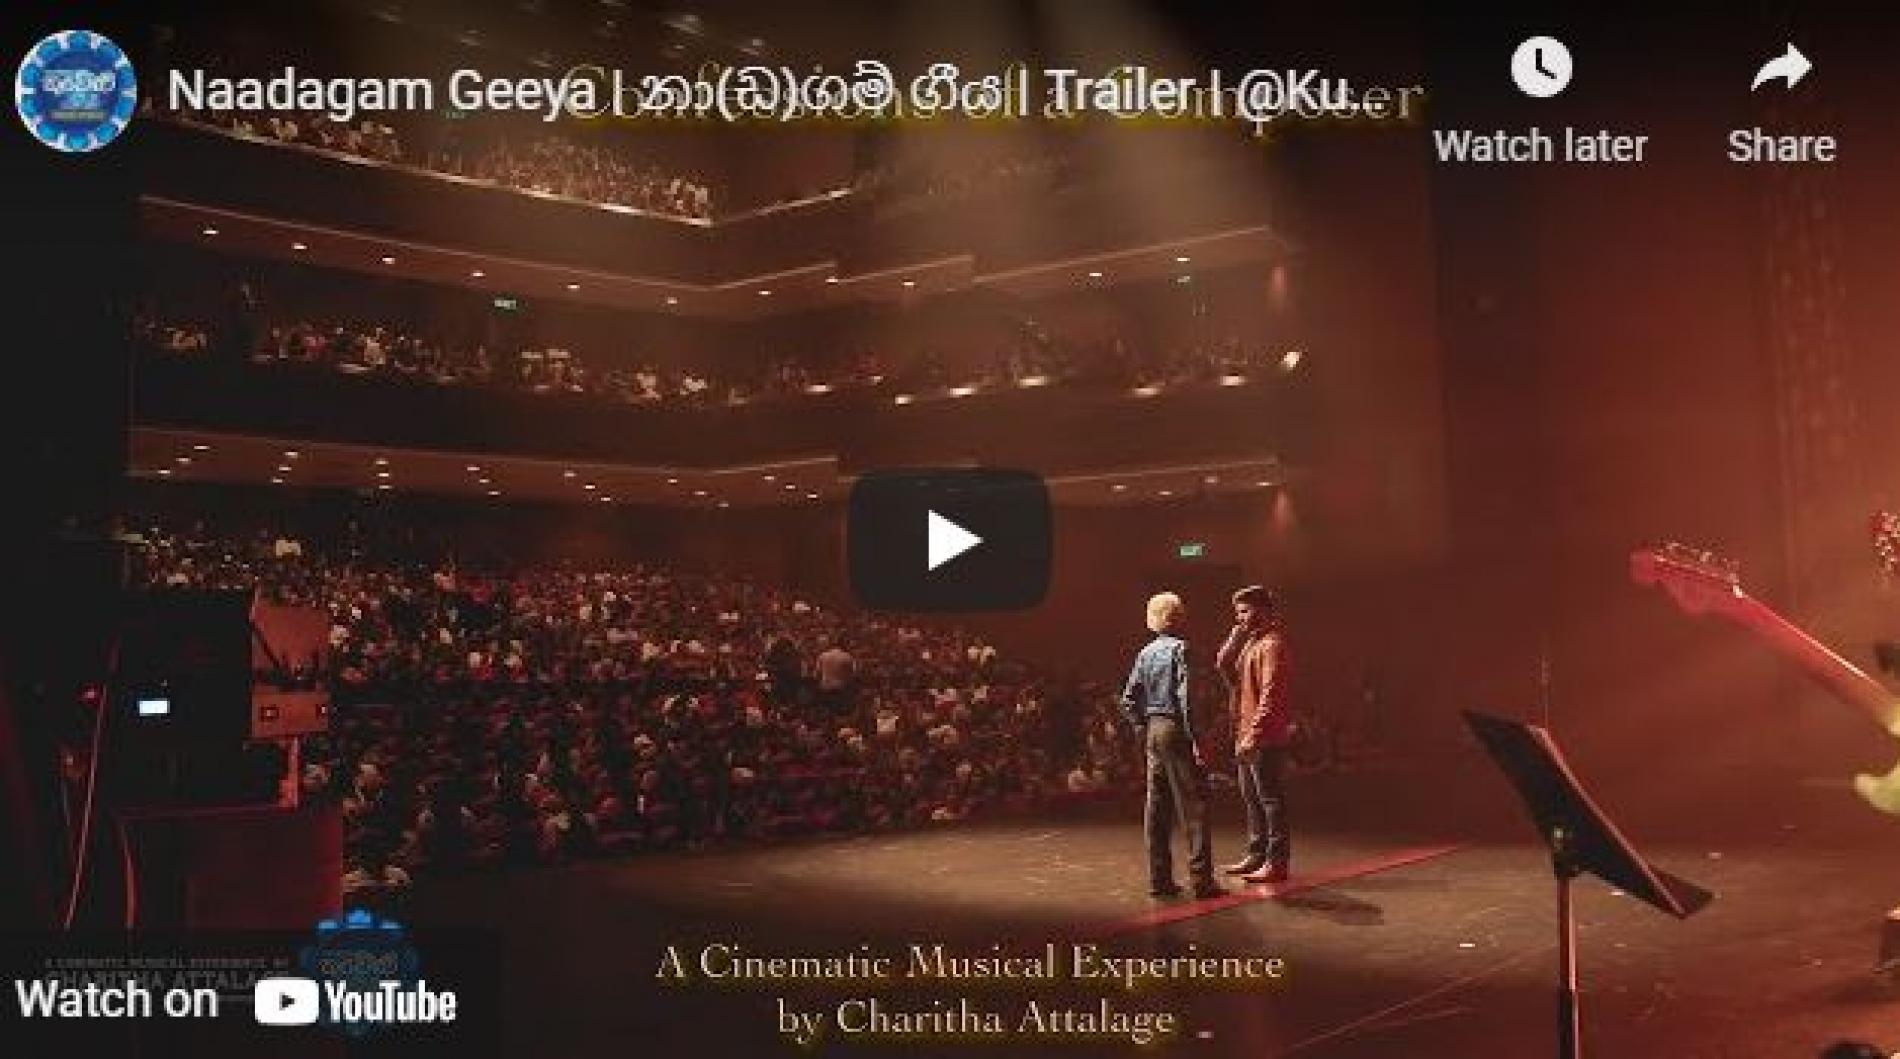 News : Naadagam Geeya | නා(ඩ)ගම් ගීය | Trailer | @Kuweni By Charitha Attalage | Confessions Of A Composer